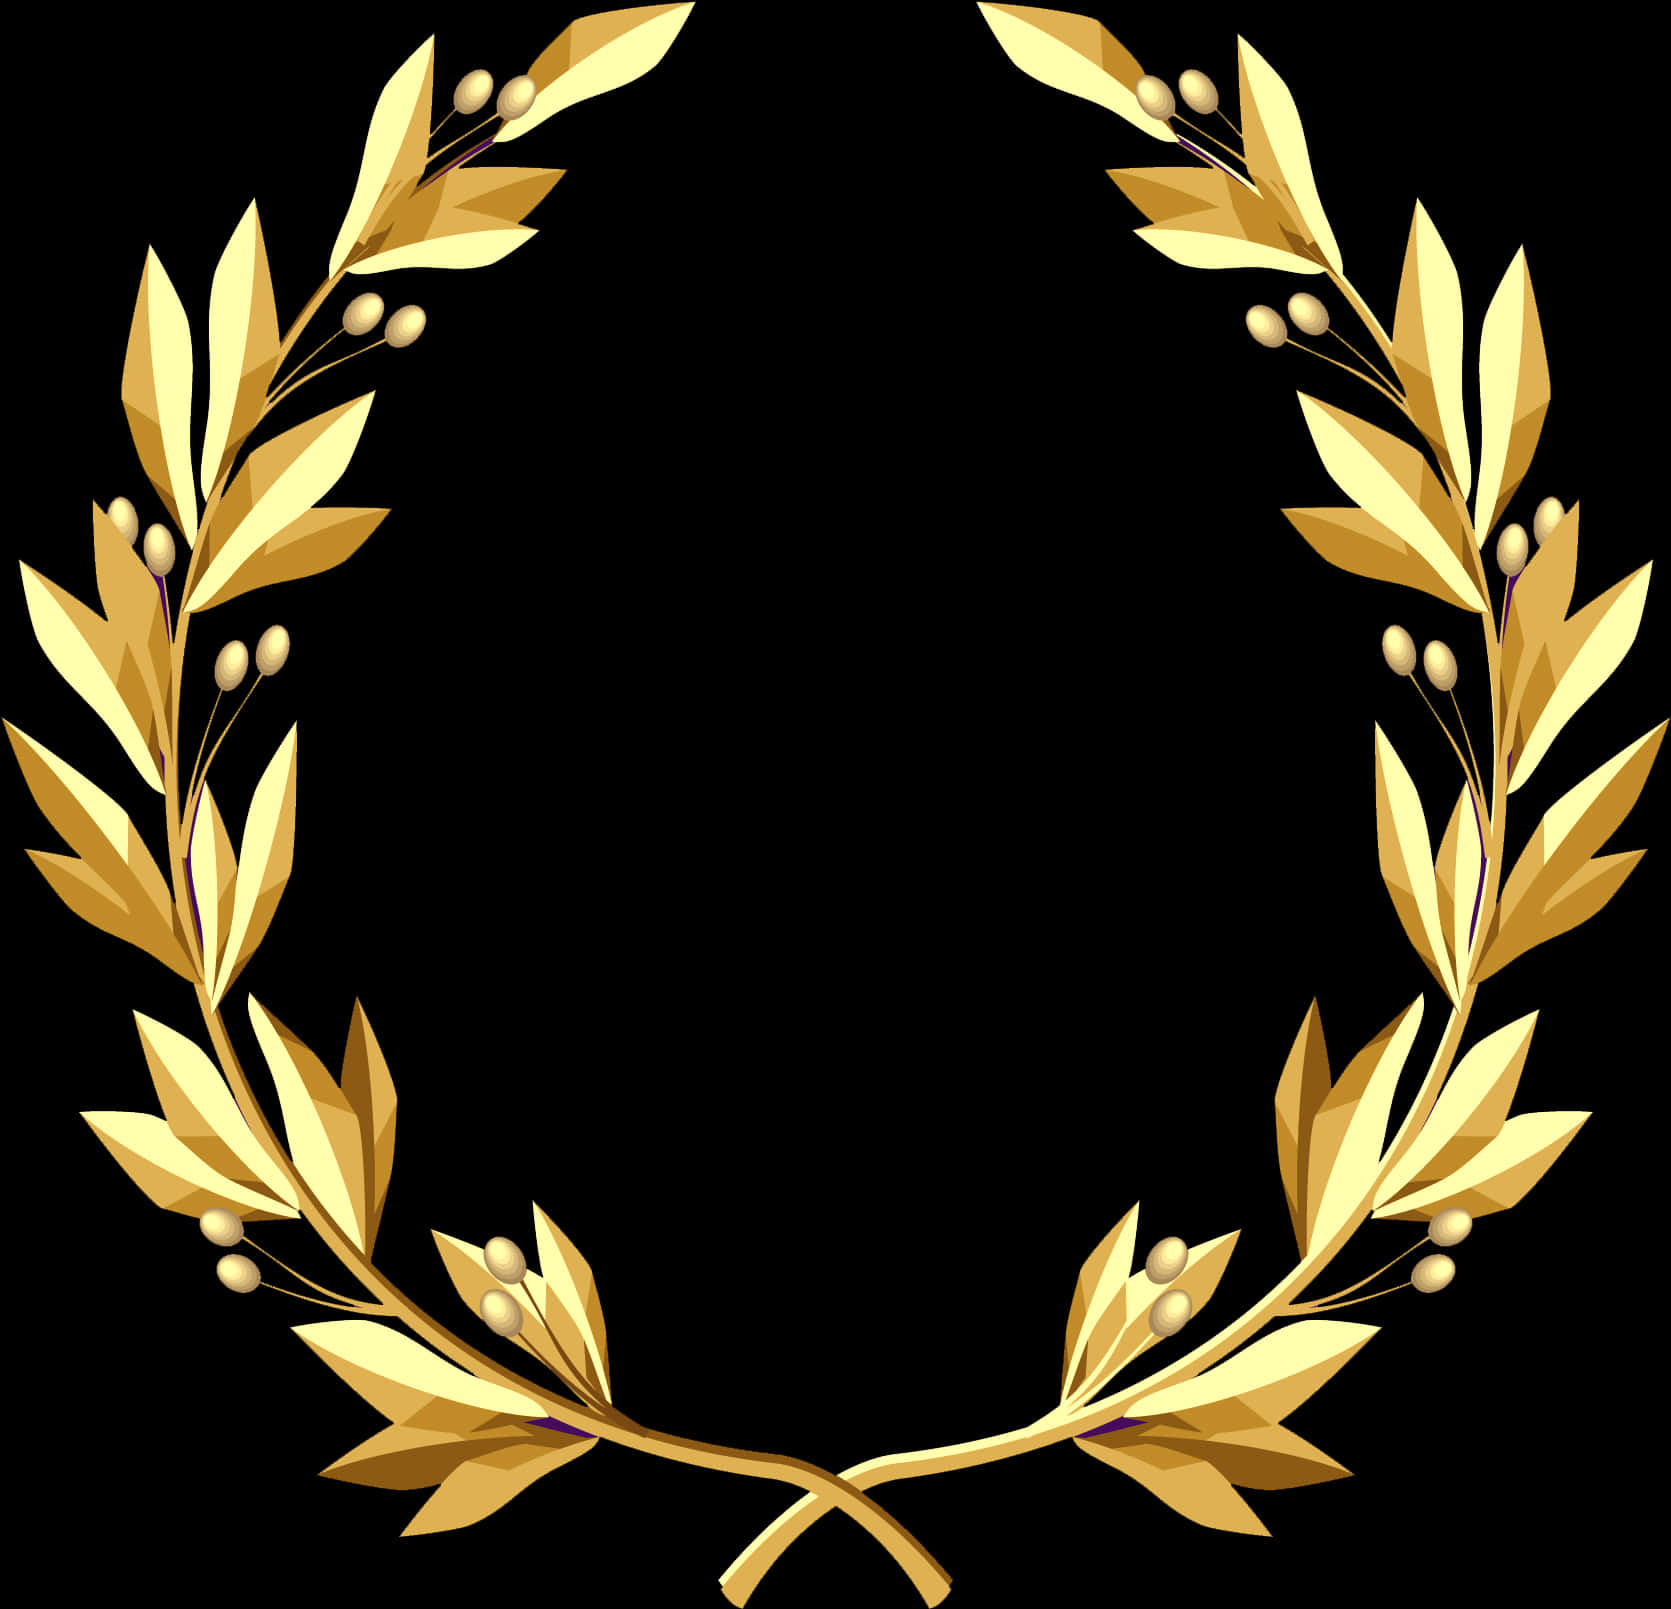 A Gold Laurel Wreath With Berries